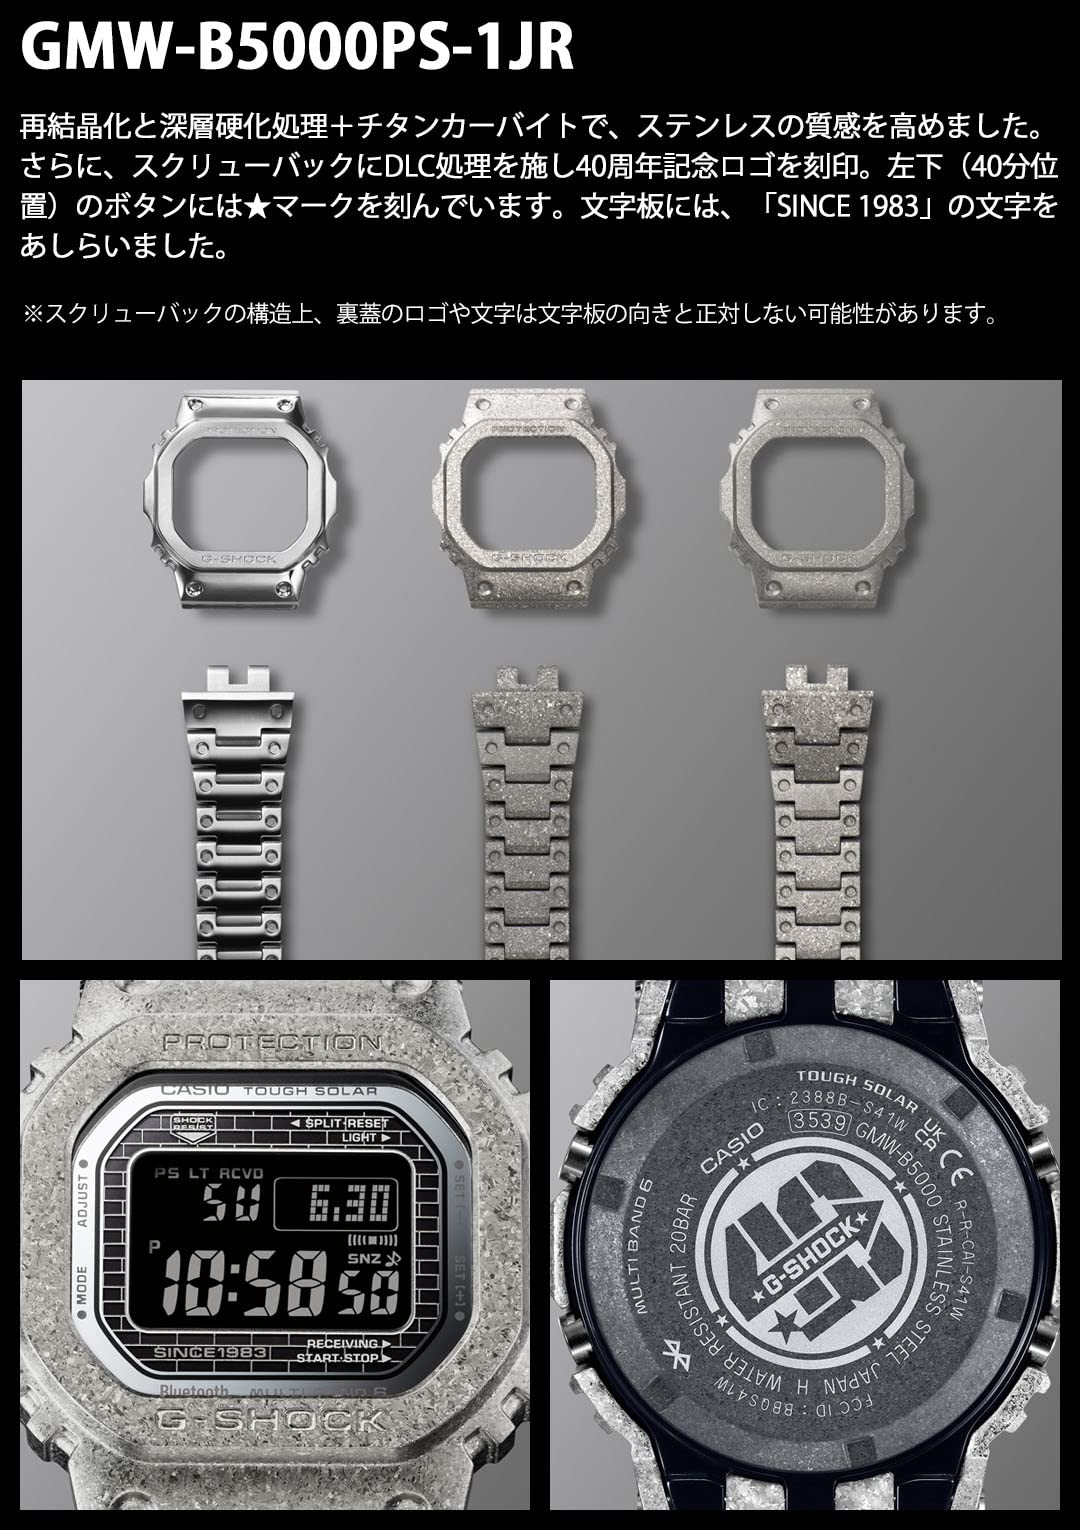 Buy Casio GMW-B5000 Series Wristwatch, Equipped with Bluetooth